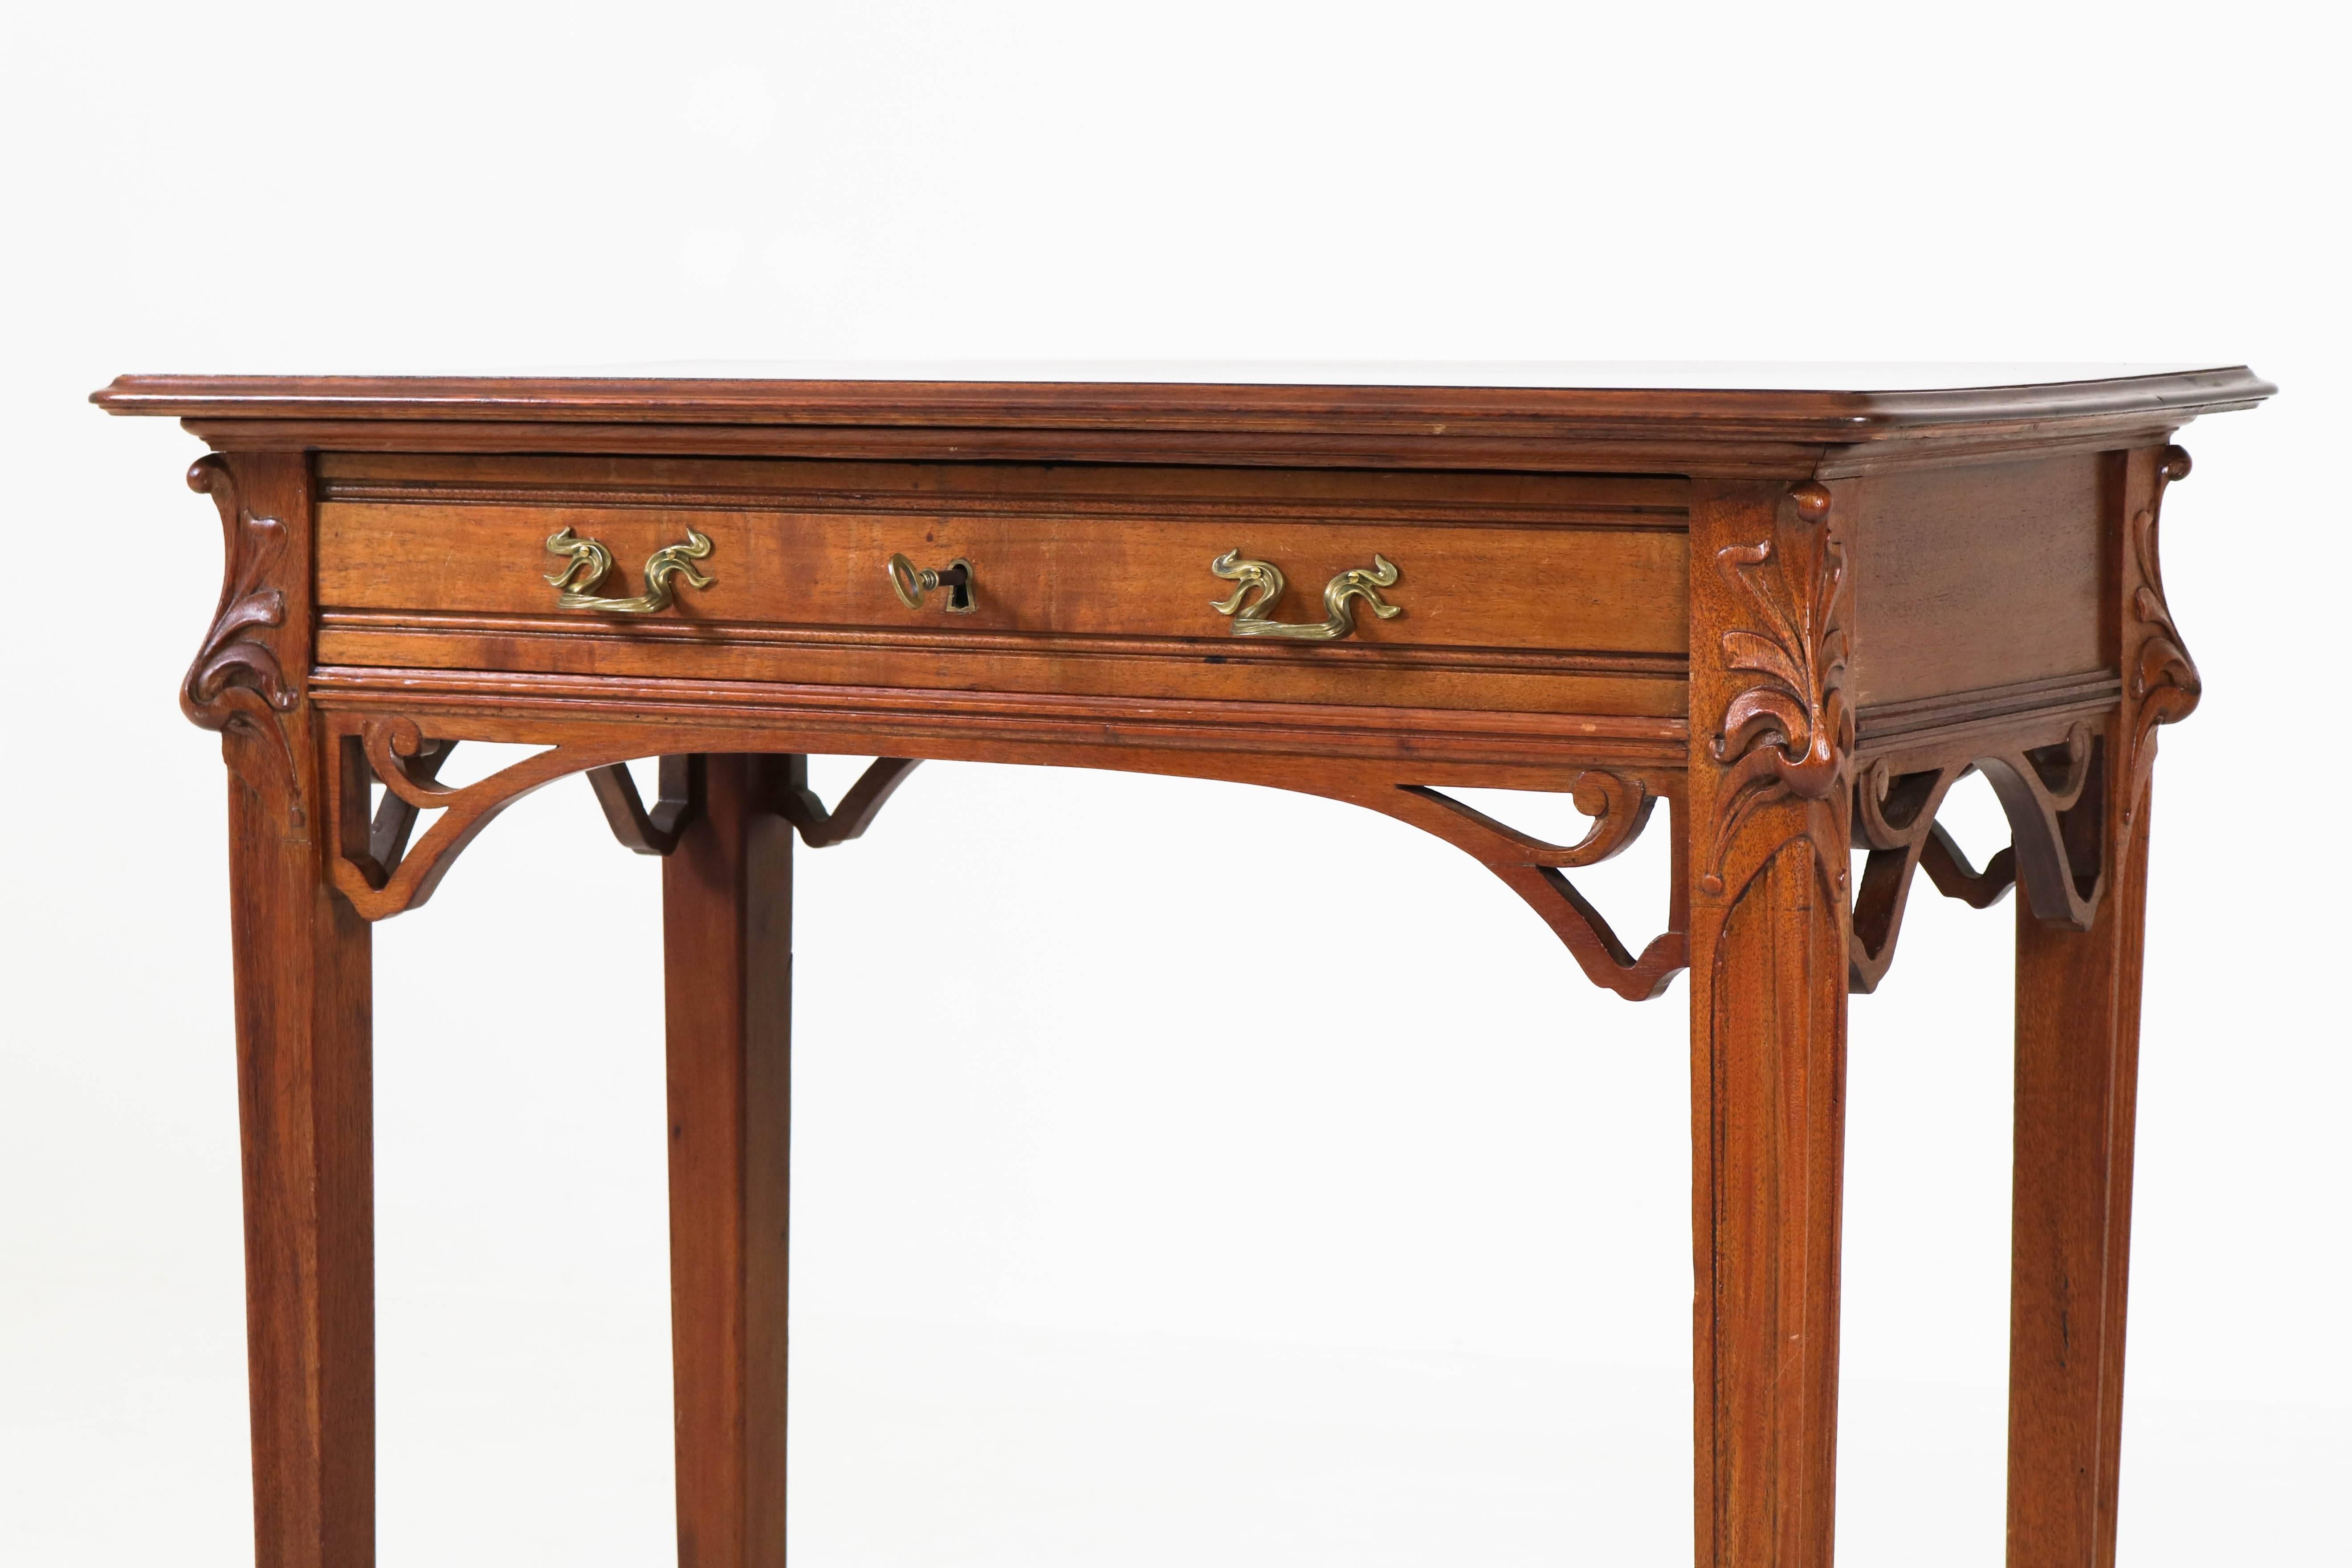 Stunning mahogany French Art Nouveau console table, 1900s.
Original bronze handles on the drawer.
In the style of Louis Majorelle
In very good condition with minor wear consistent with age and use,
preserving a beautiful patina.